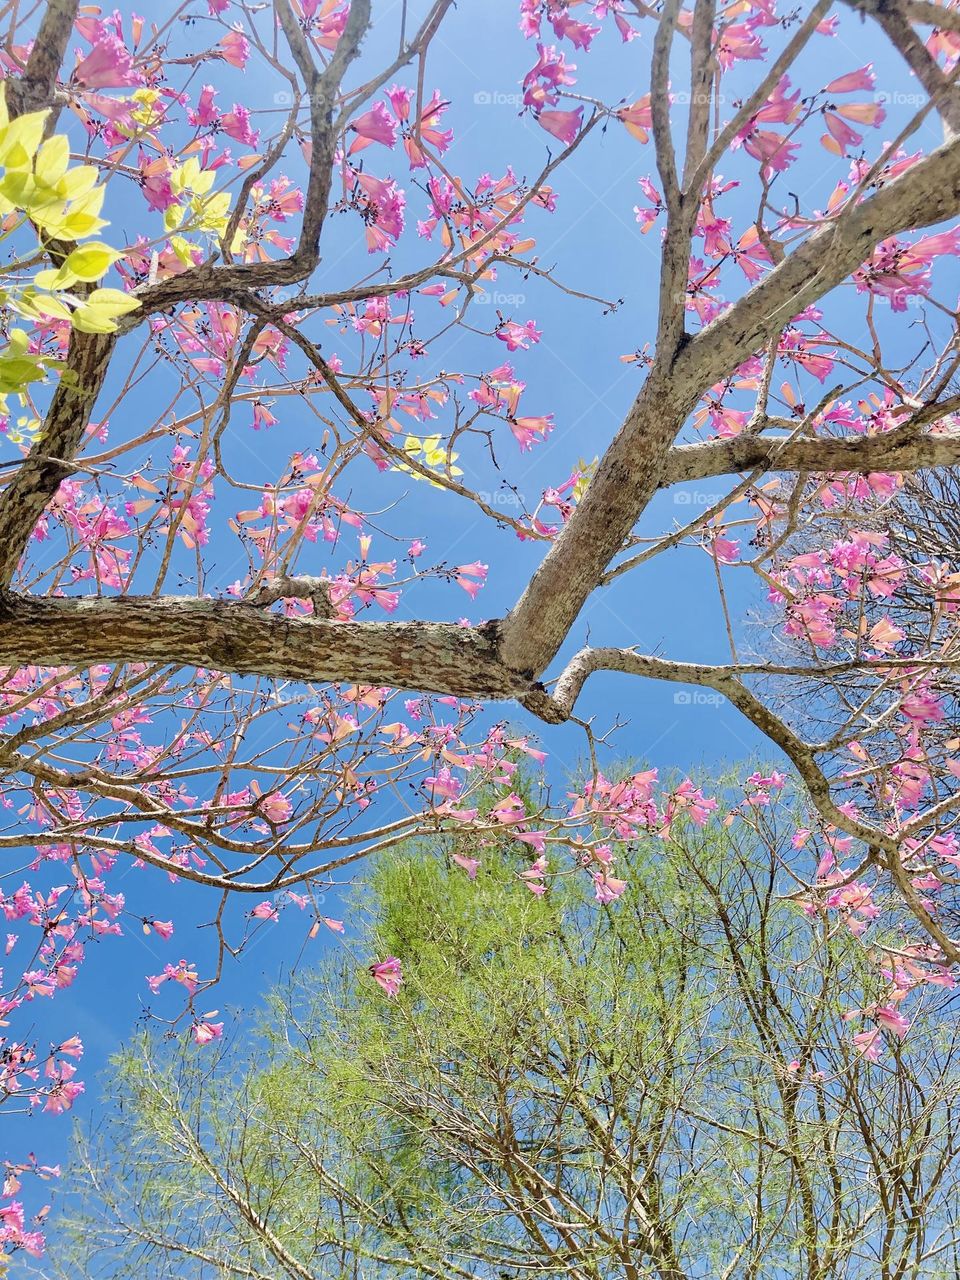 Beautiful pink blossoms on a tree